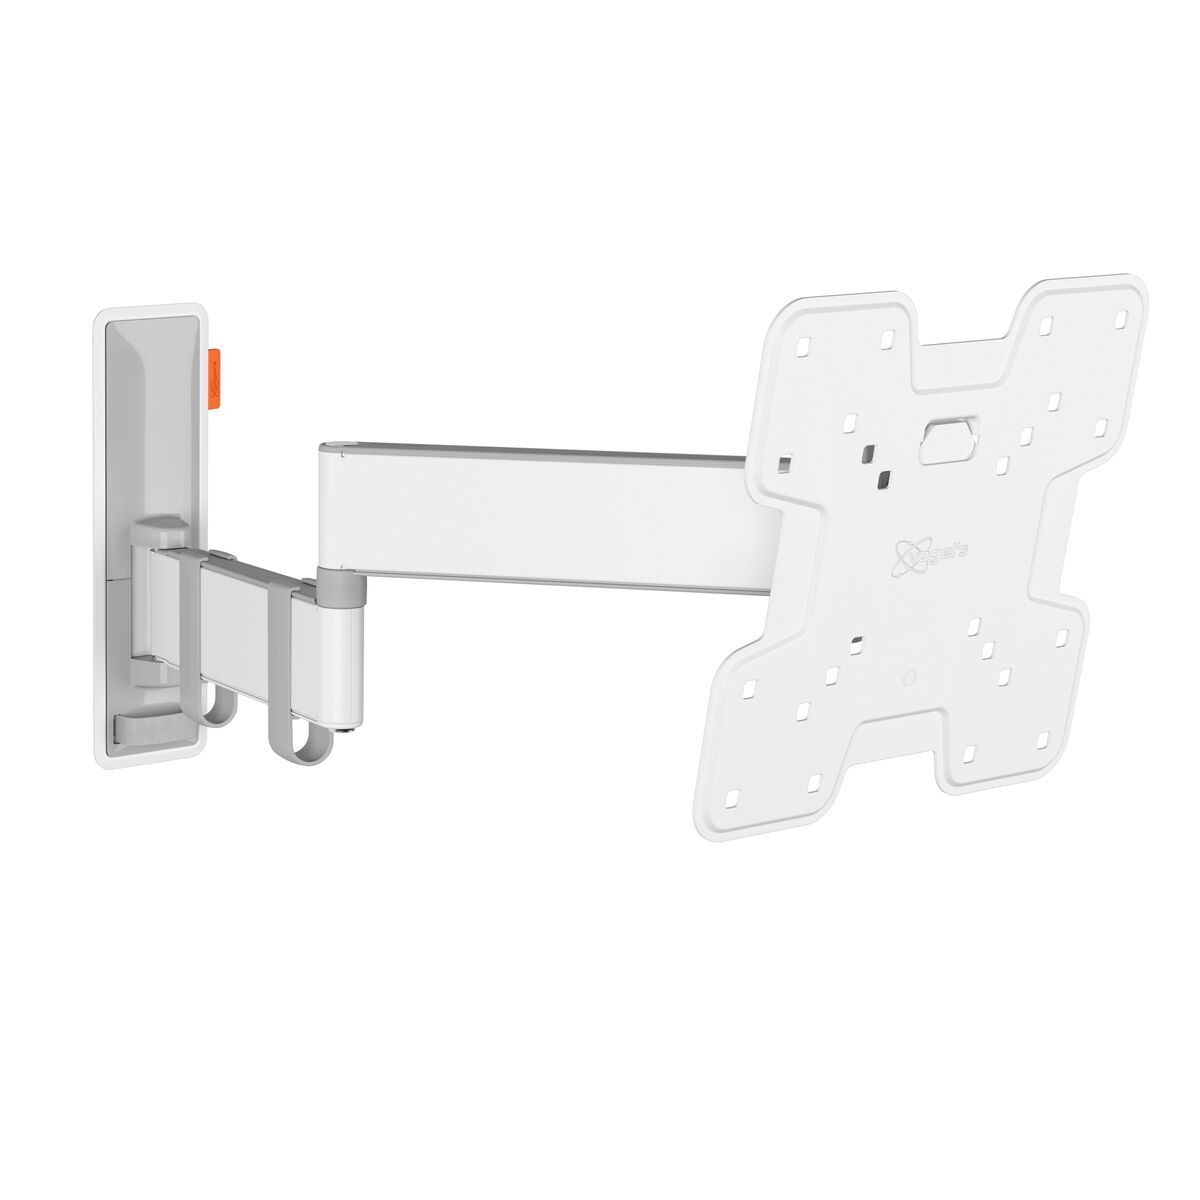 Vogel's TVM 3245 Full-Motion TV Wall Mount (white) - Suitable for 19 up to 43 inch TVs - Full motion (up to 180°) swivel - Tilt up to 20° - Product